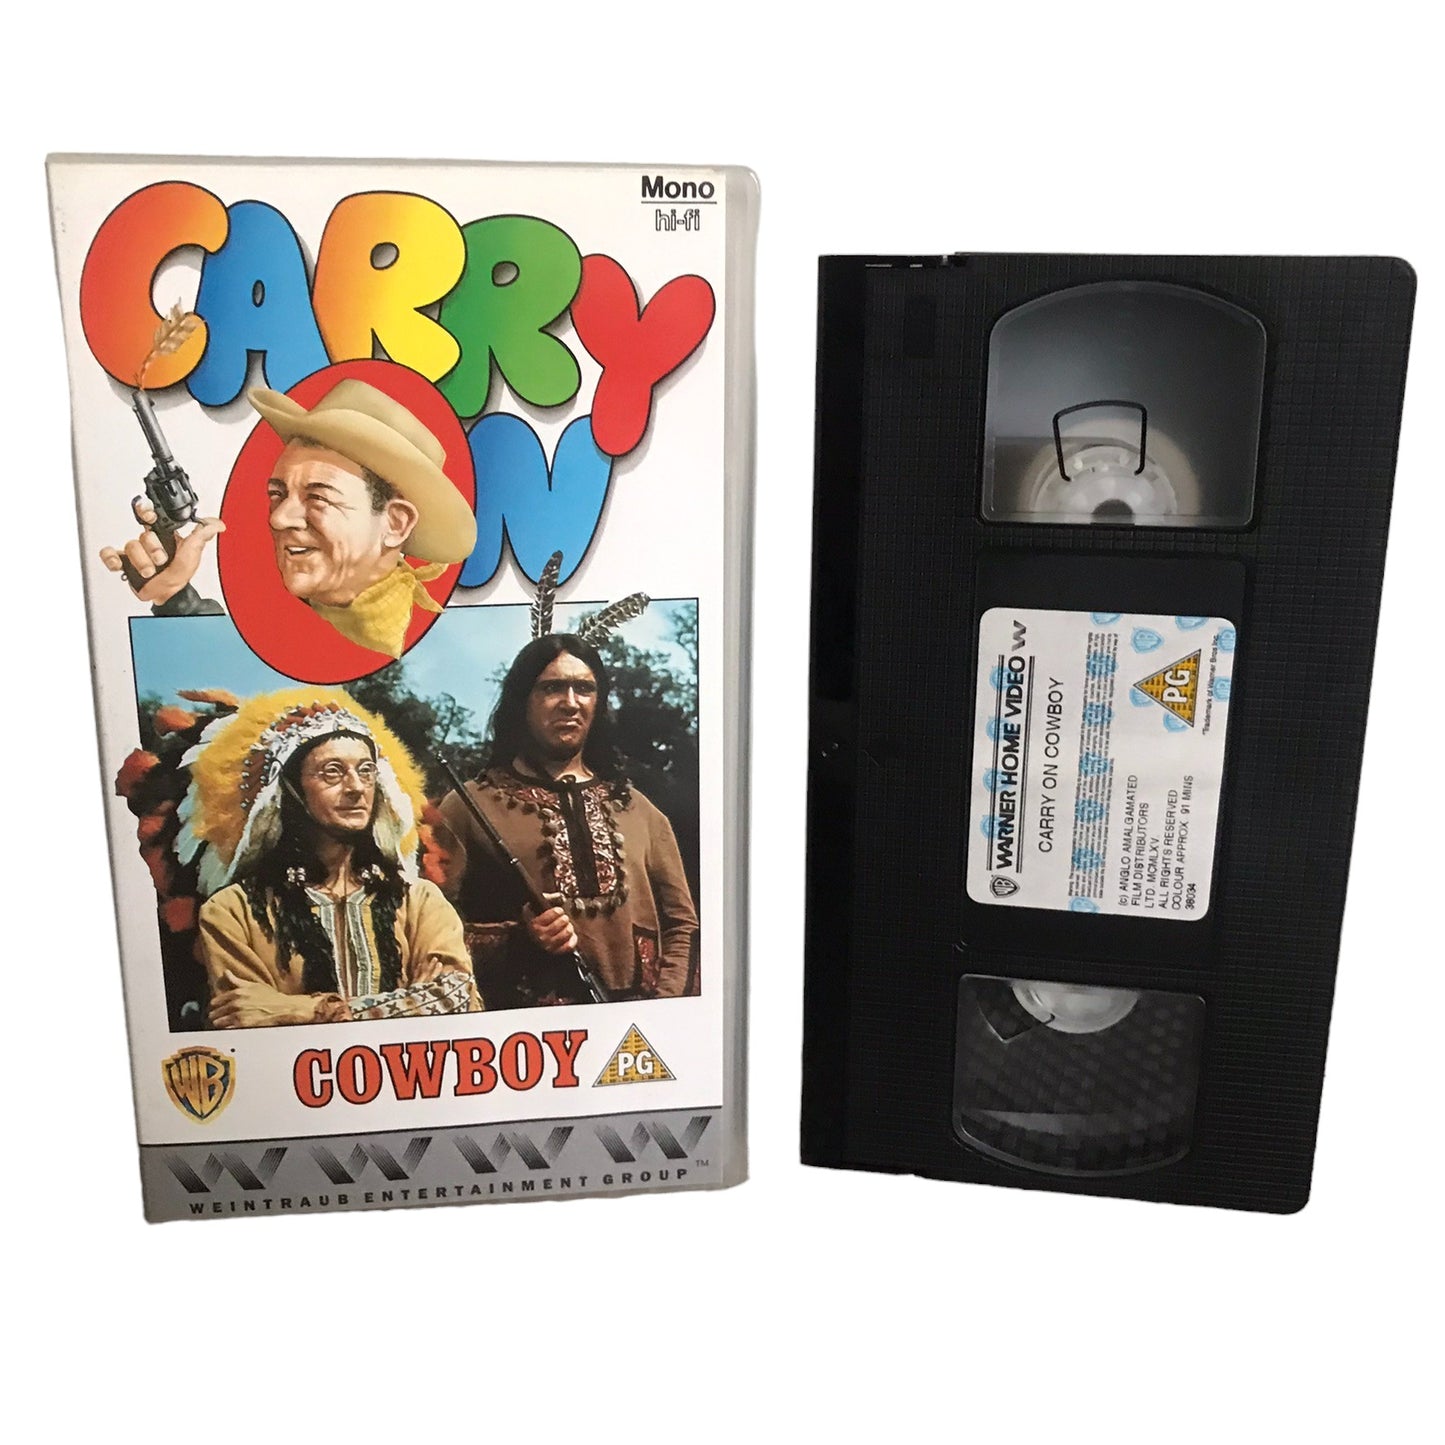 Carry On Cowboy - Sidney James - Warner Home Video - Comedy - Pal - VHS-